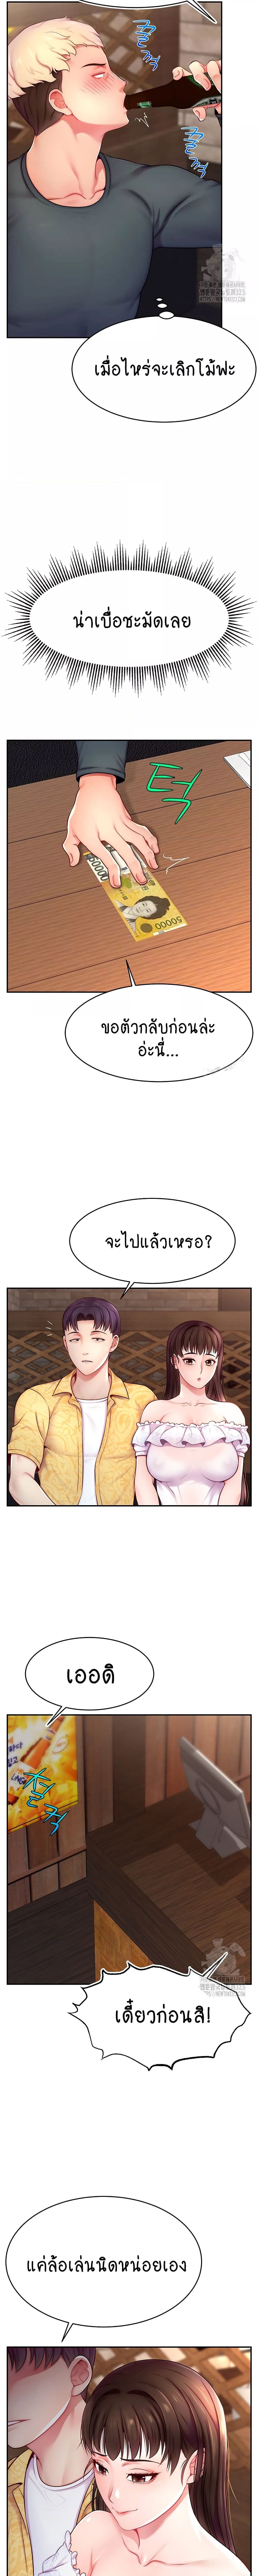 Making Friends With Streamers by Hacking! ตอนที่ 10 ภาพ 10